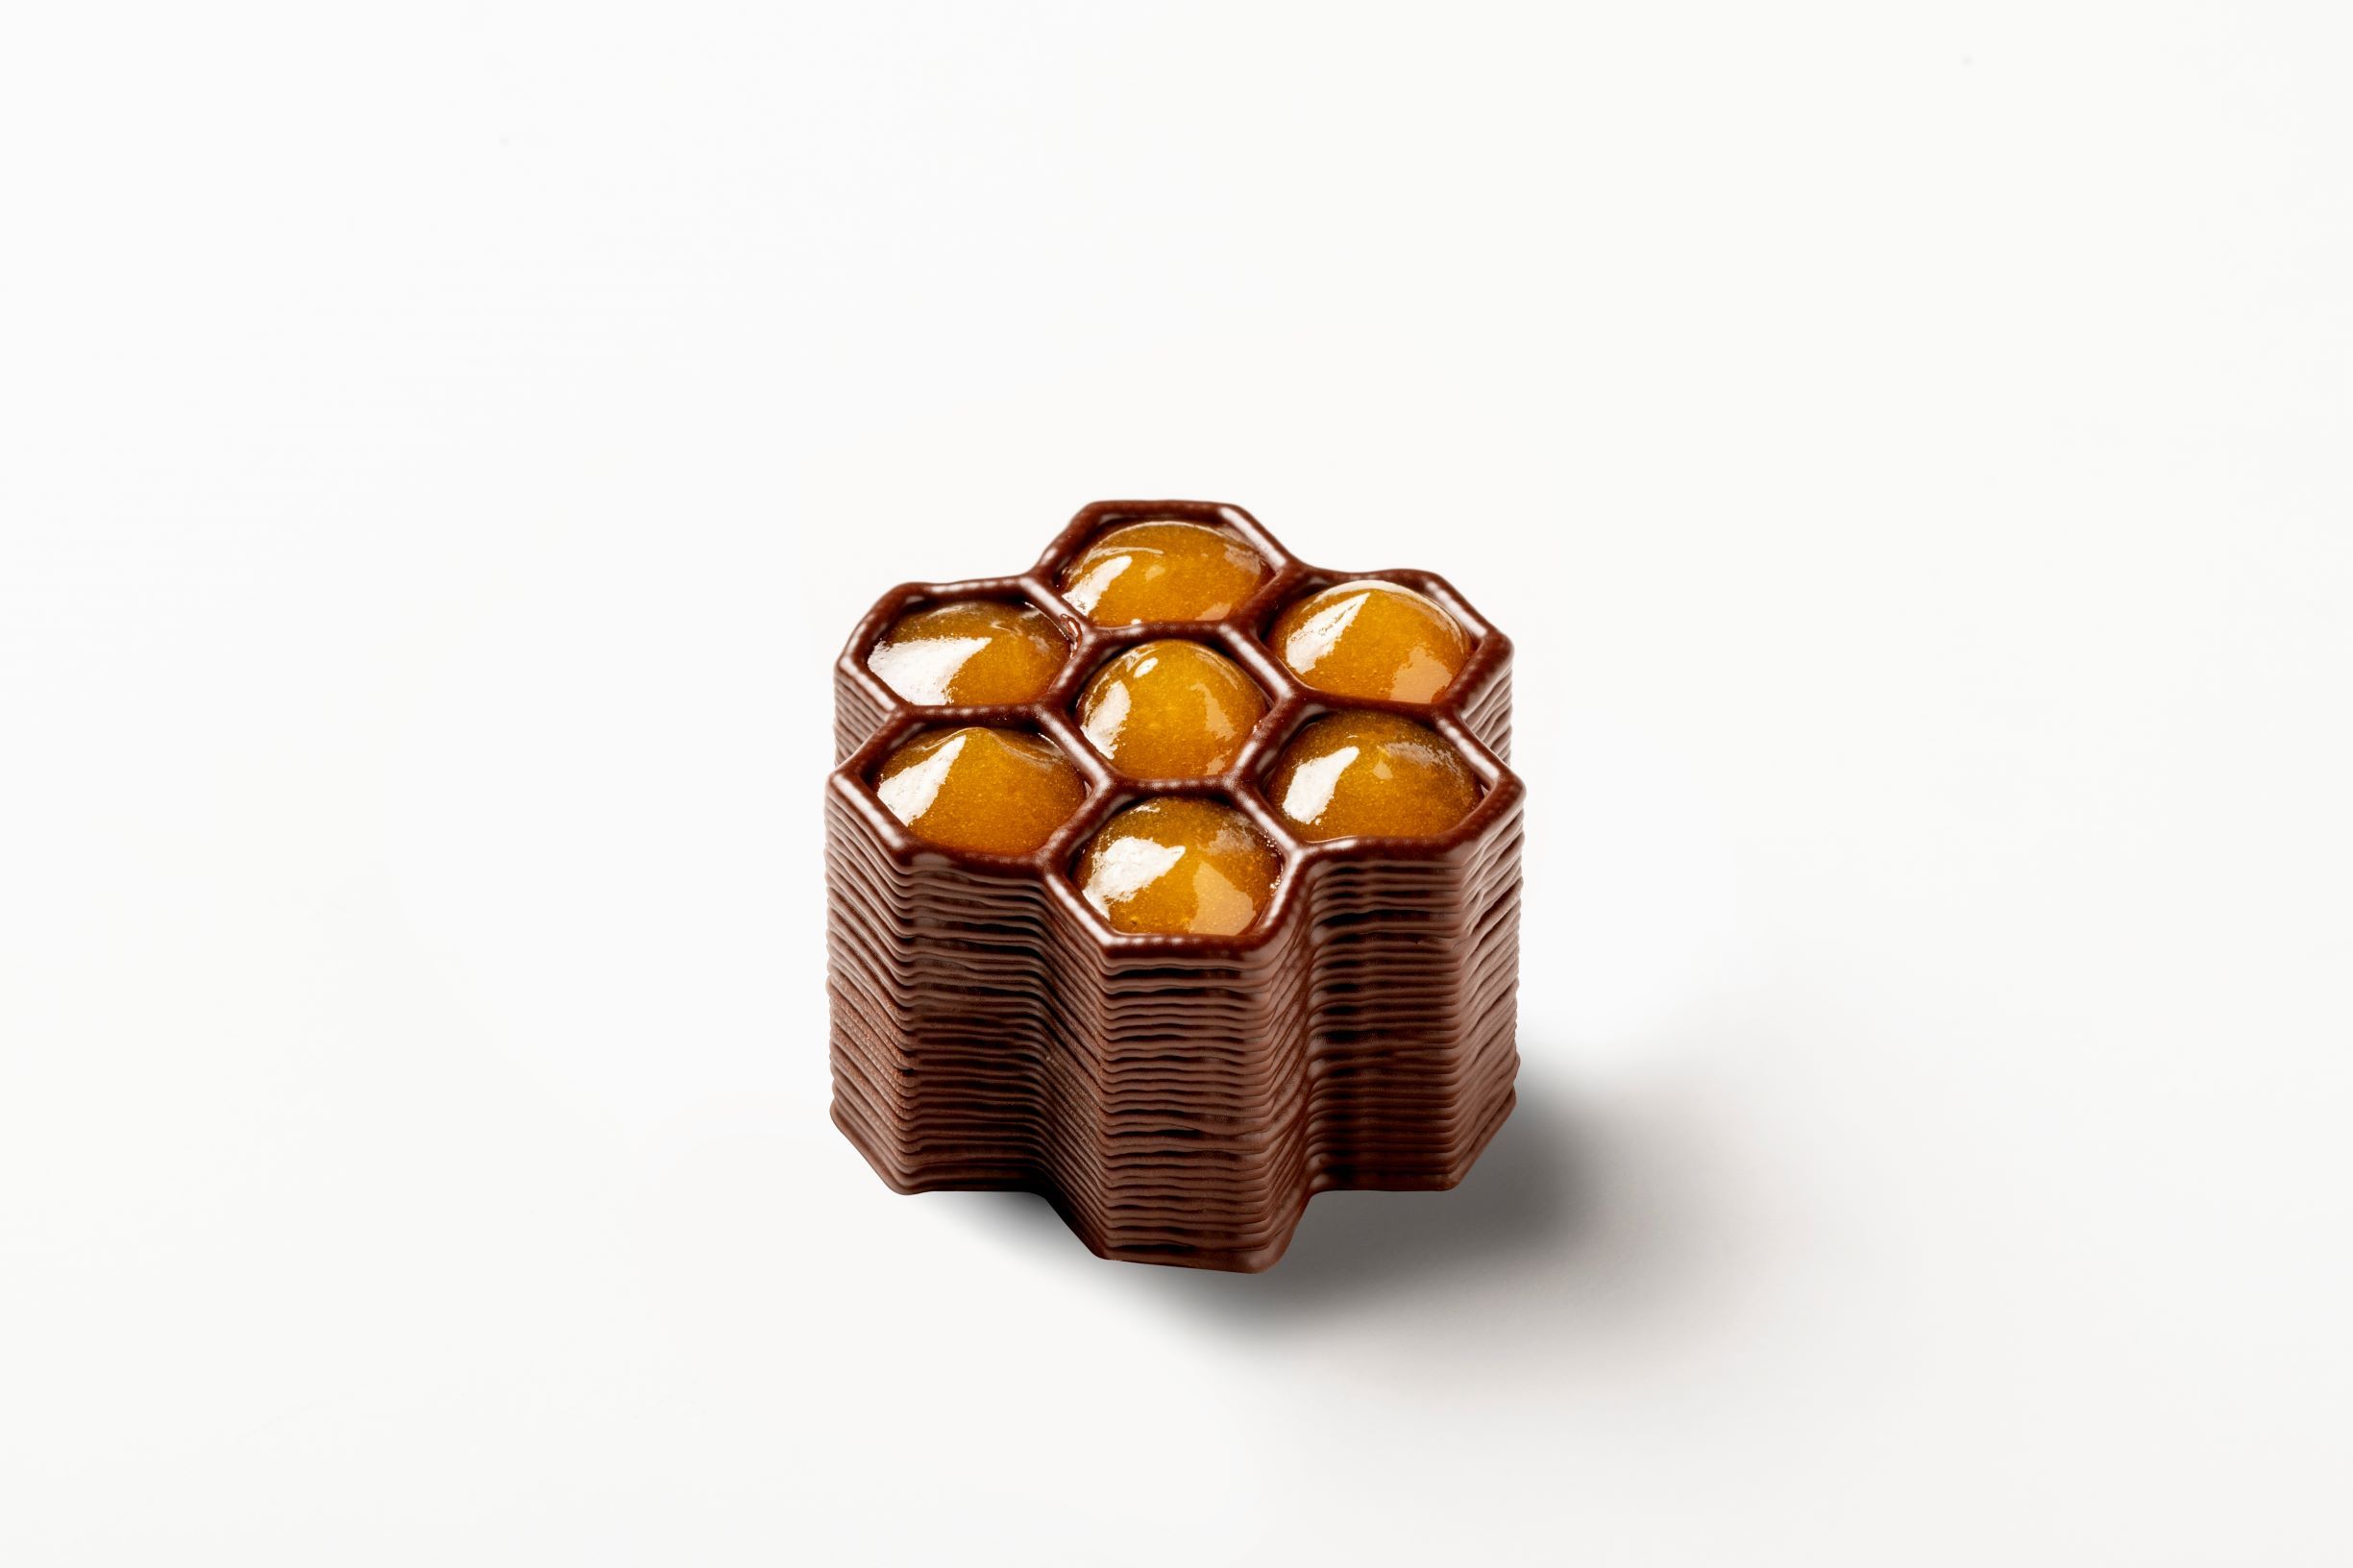 Multi-layered milkchocolate 3D-shape filled with marmalade made with FoodJet 3D chocolate printer